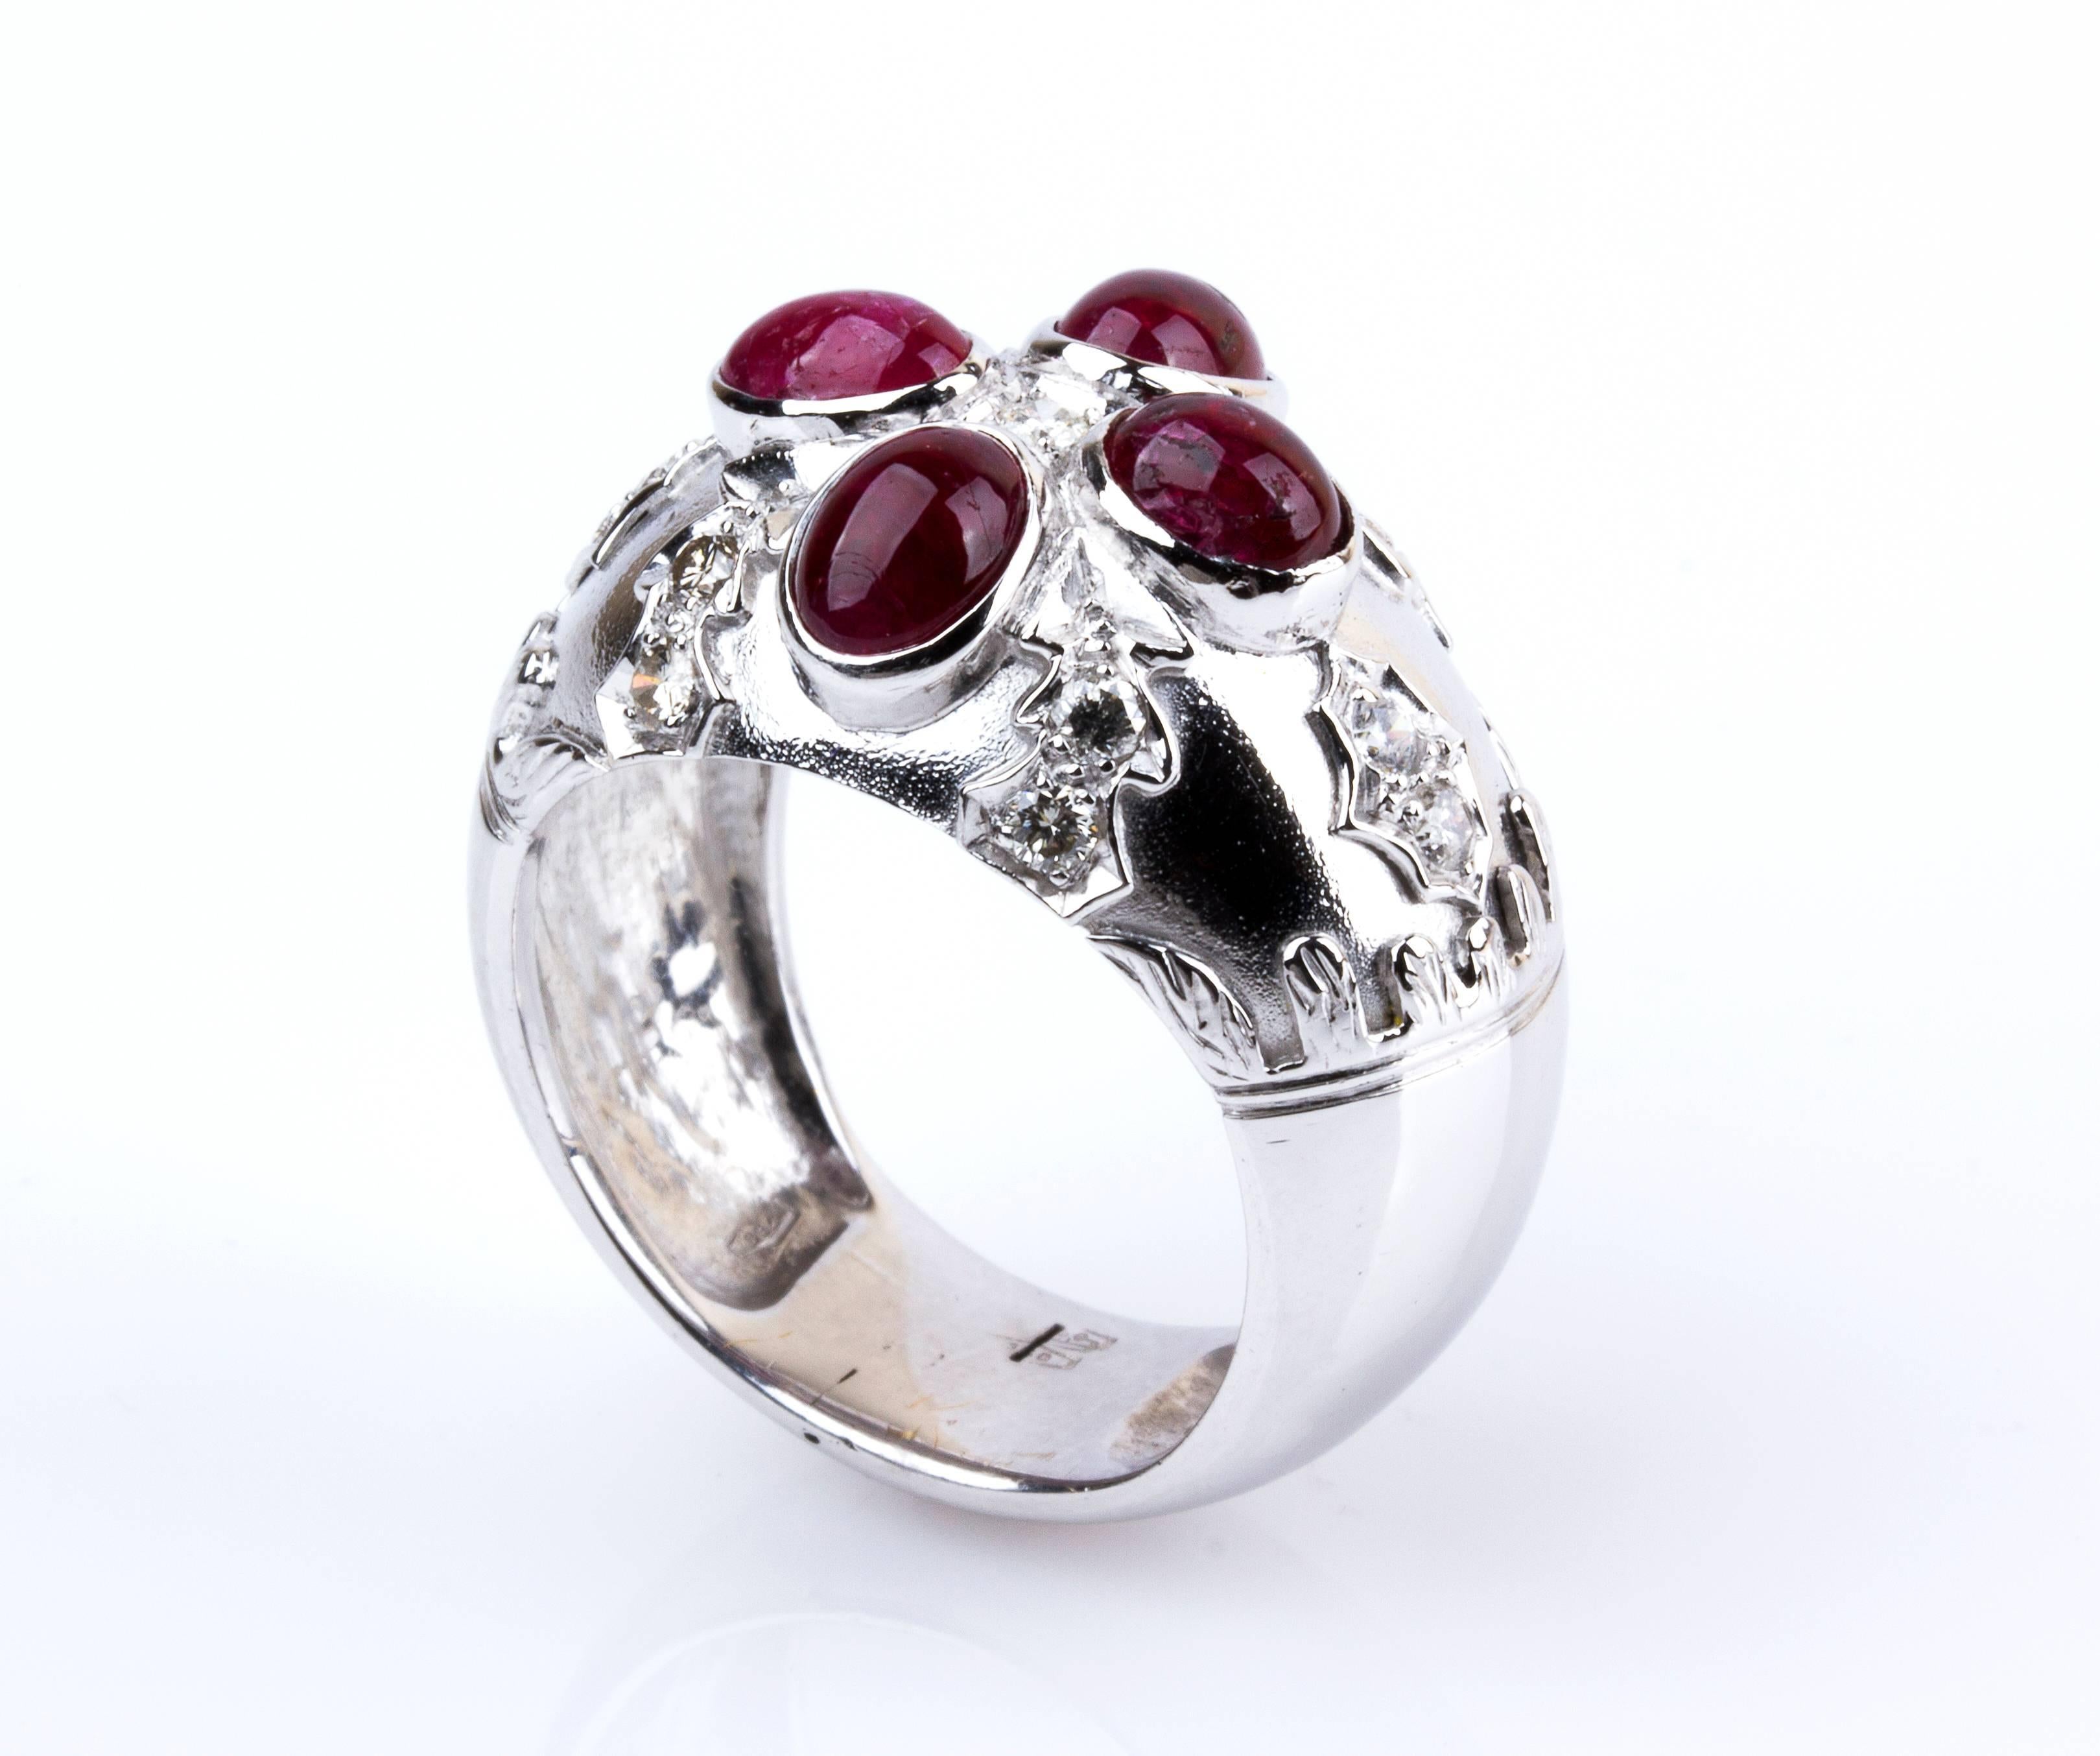 Shaped as a band set 4 cabochon-cut rubies and 13 round brilliant-cut diamonds decorated by floreal motifs. Size US 9. Weight 17.70 gr. Italian assay mark 750. Item condition grading: **** good.